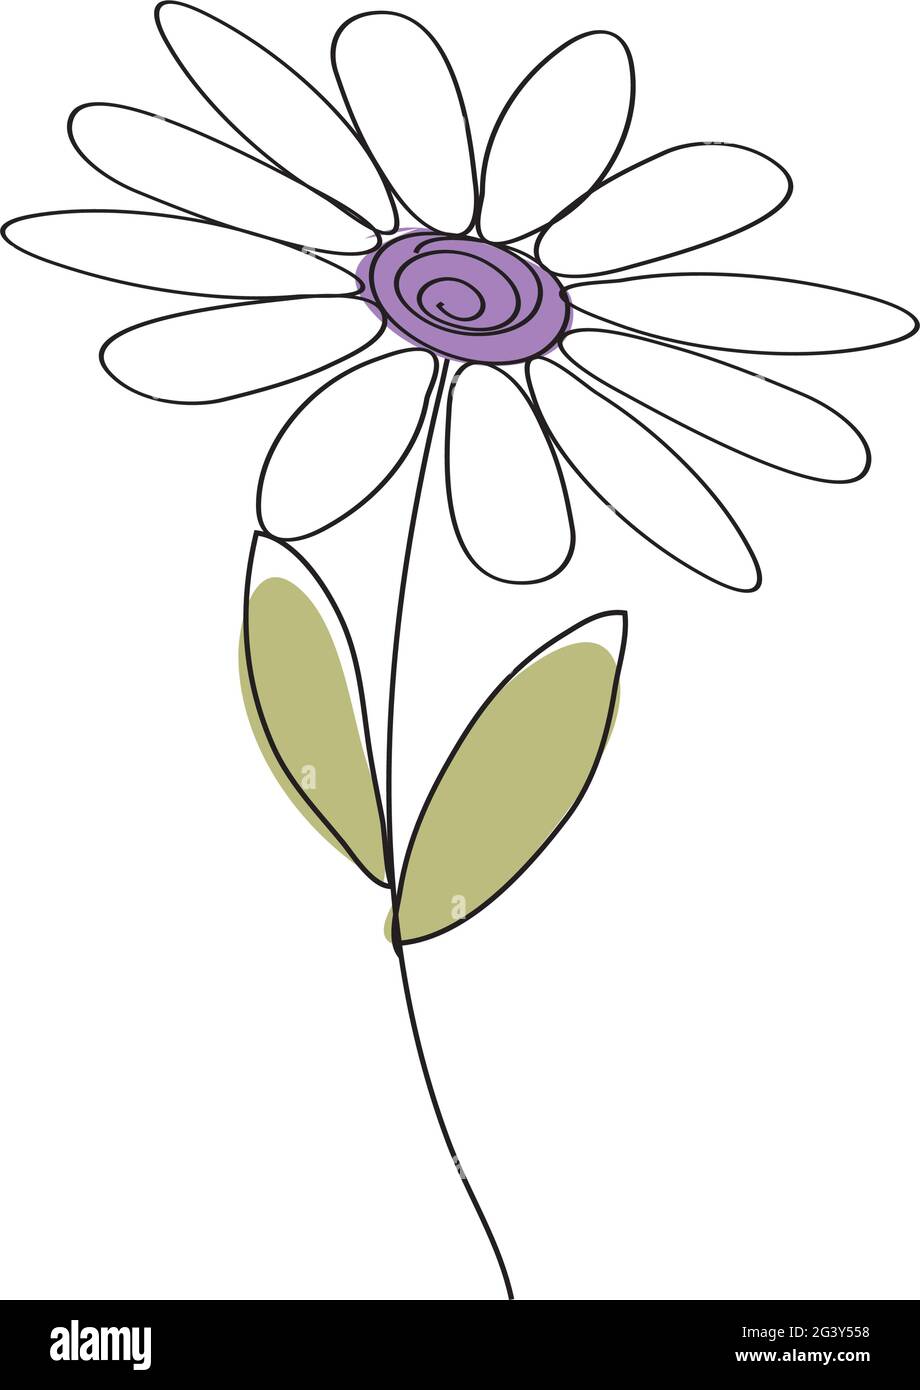 30 Easy Flower Sketches for Beginners [With Printables] - The (mostly)  Simple Life